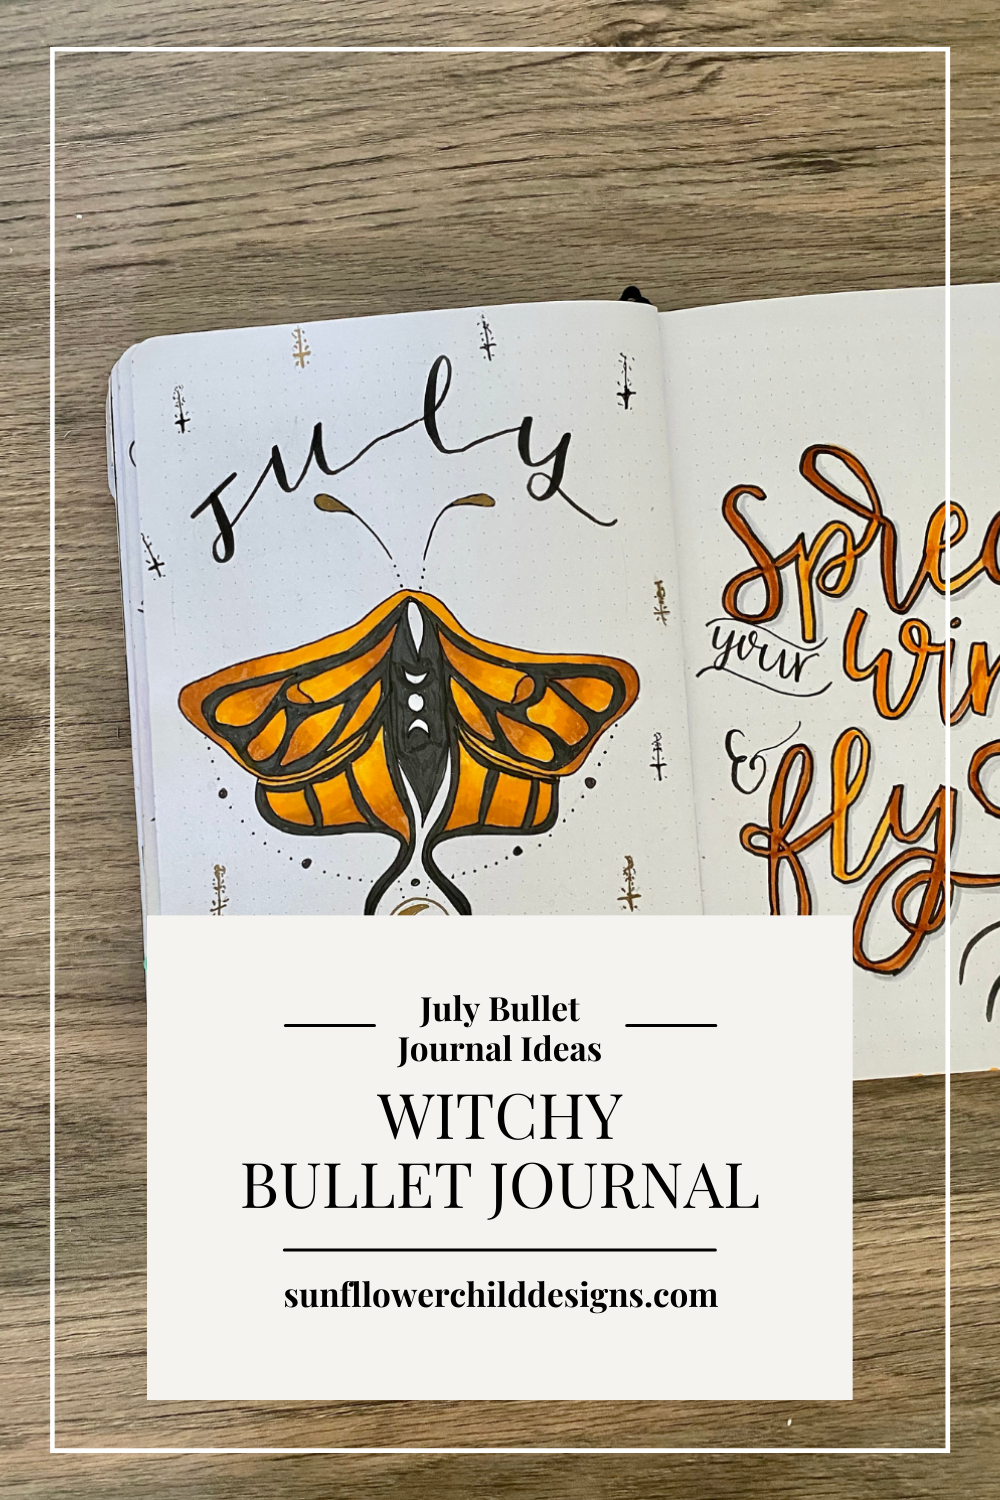 july-bullet-journal-ideas-for-a-witchy-bullet-journal 3.png